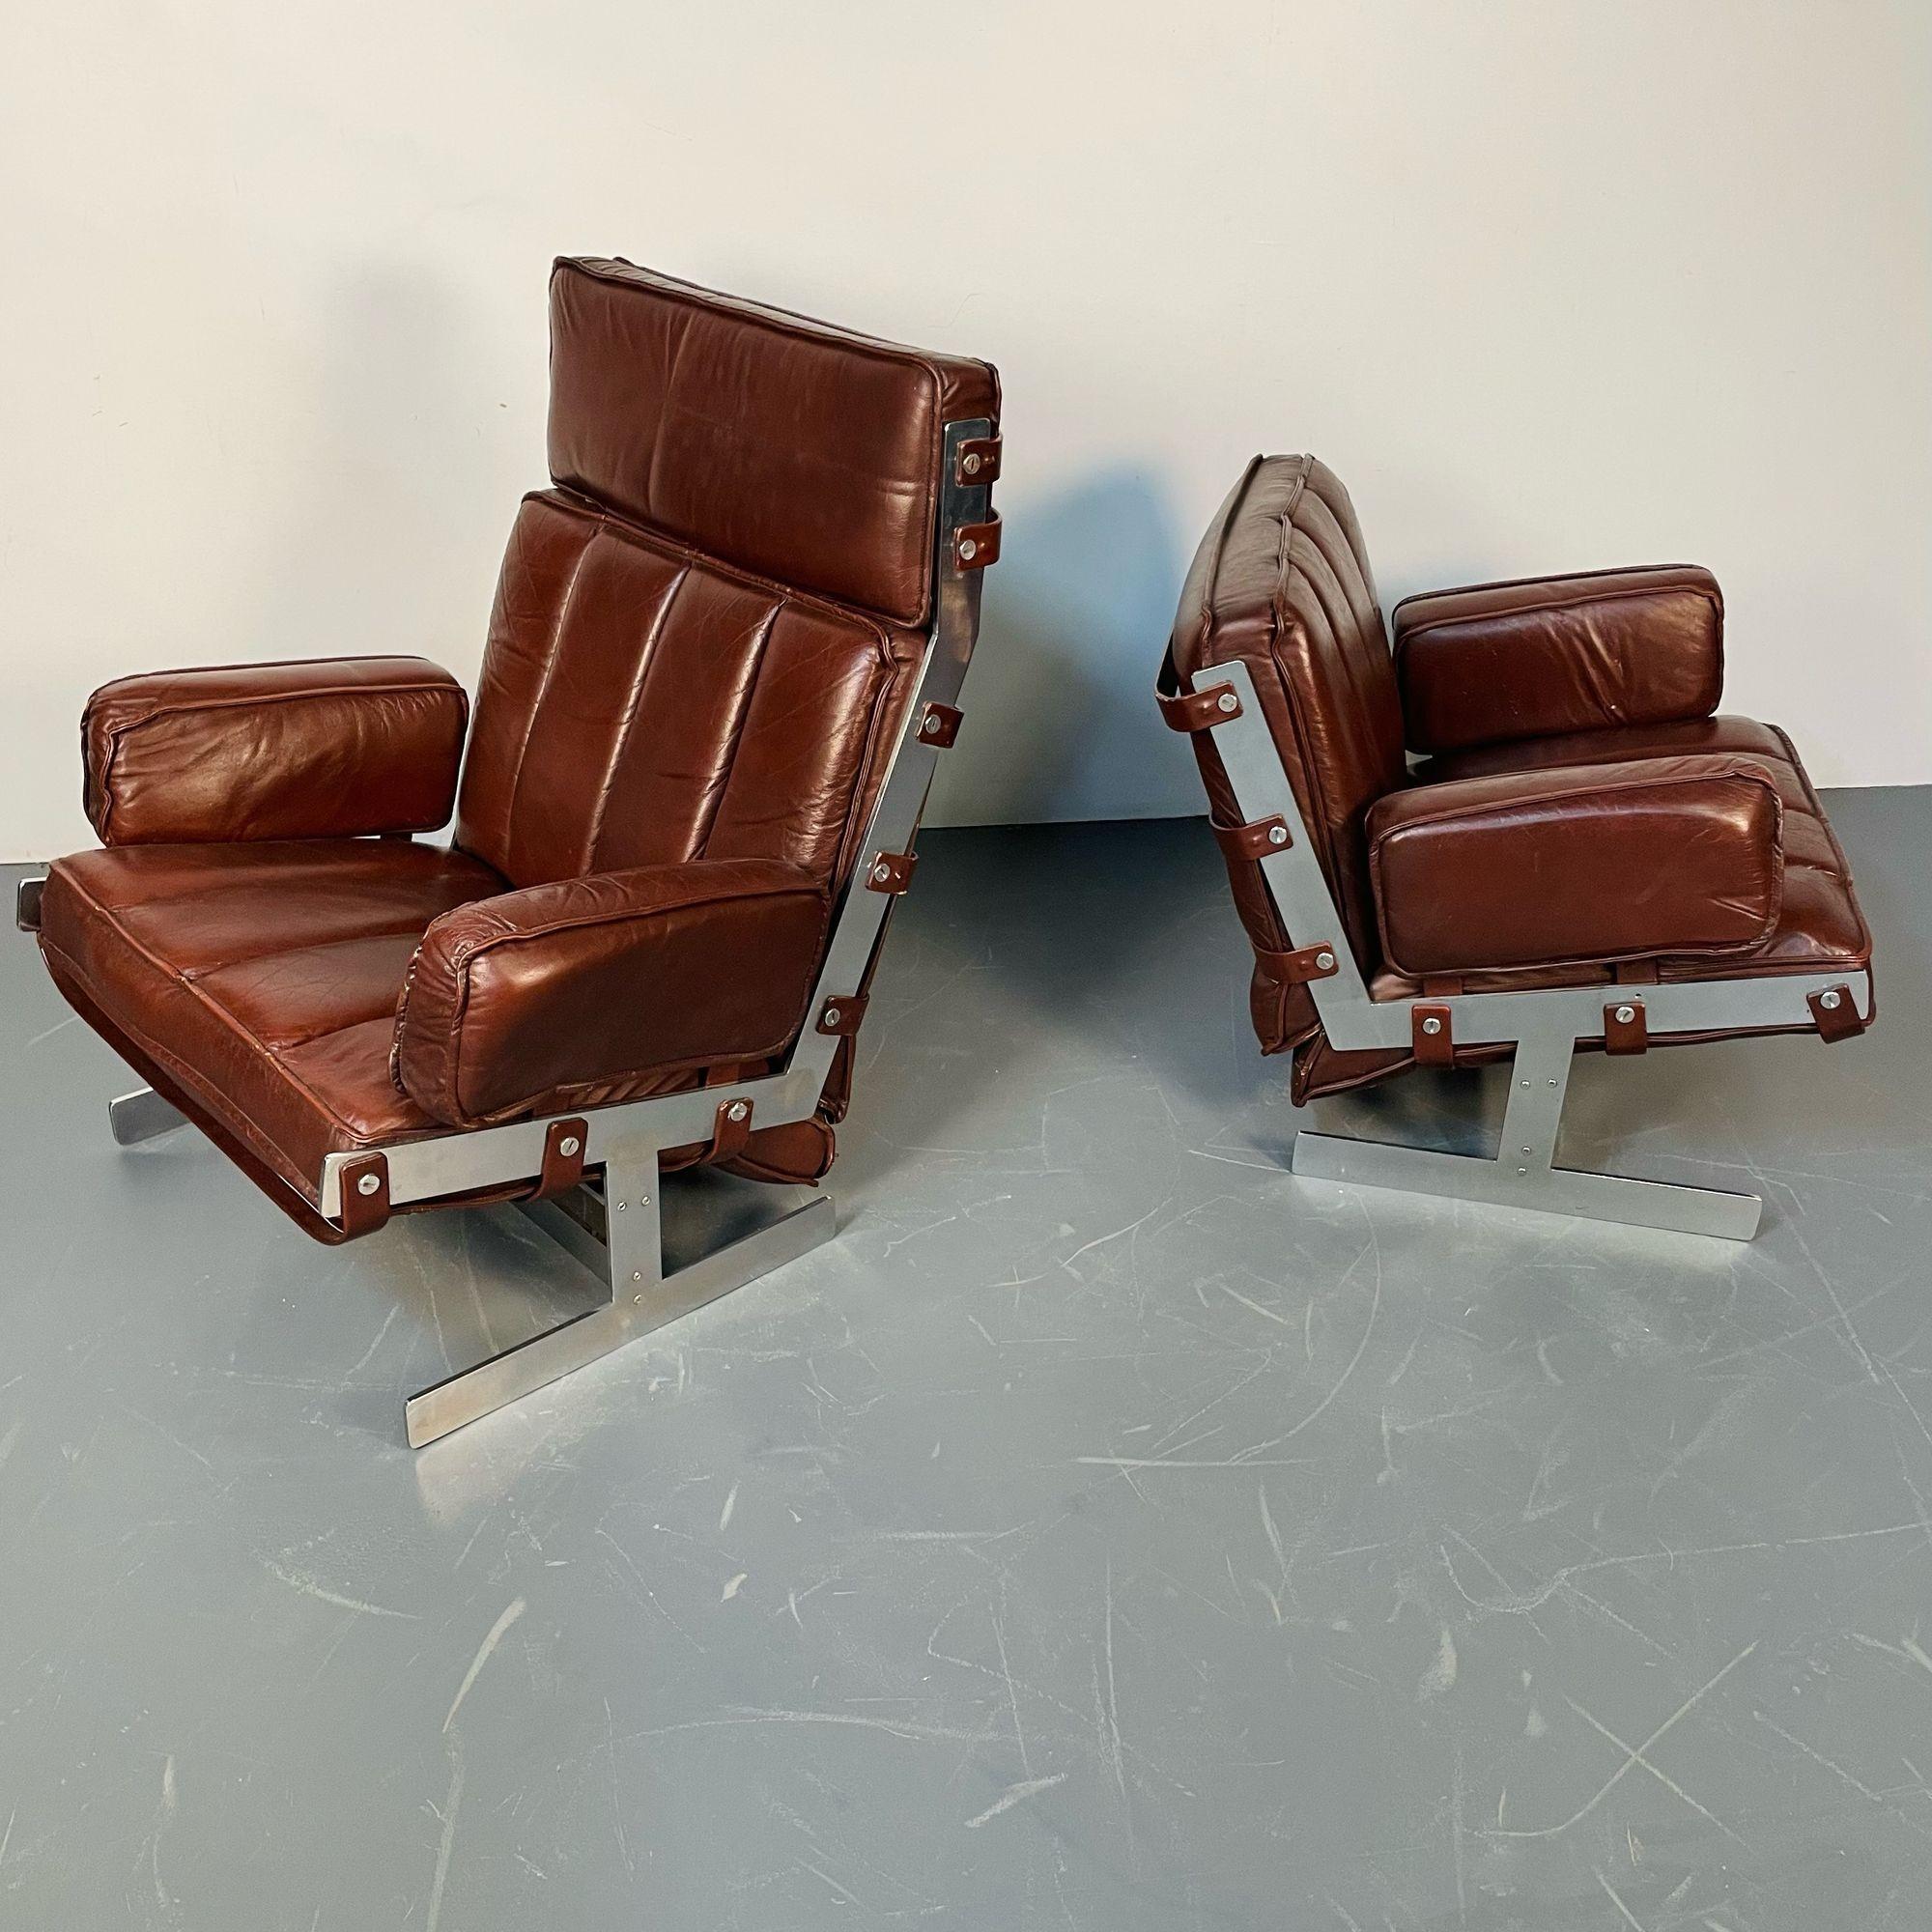 Arne Norell, Swedish Mid-Century Modern Lounge Chairs, Leather, Steel, 1960s
 
Rare pair of Swedish modern easy chairs designed by Arne Norell and produced in Sweden circa 1960s
 
Steel, Leather
Sweden, 1960s
 
38h x 32.5 w x 28d / sh 20
28.5h x 31